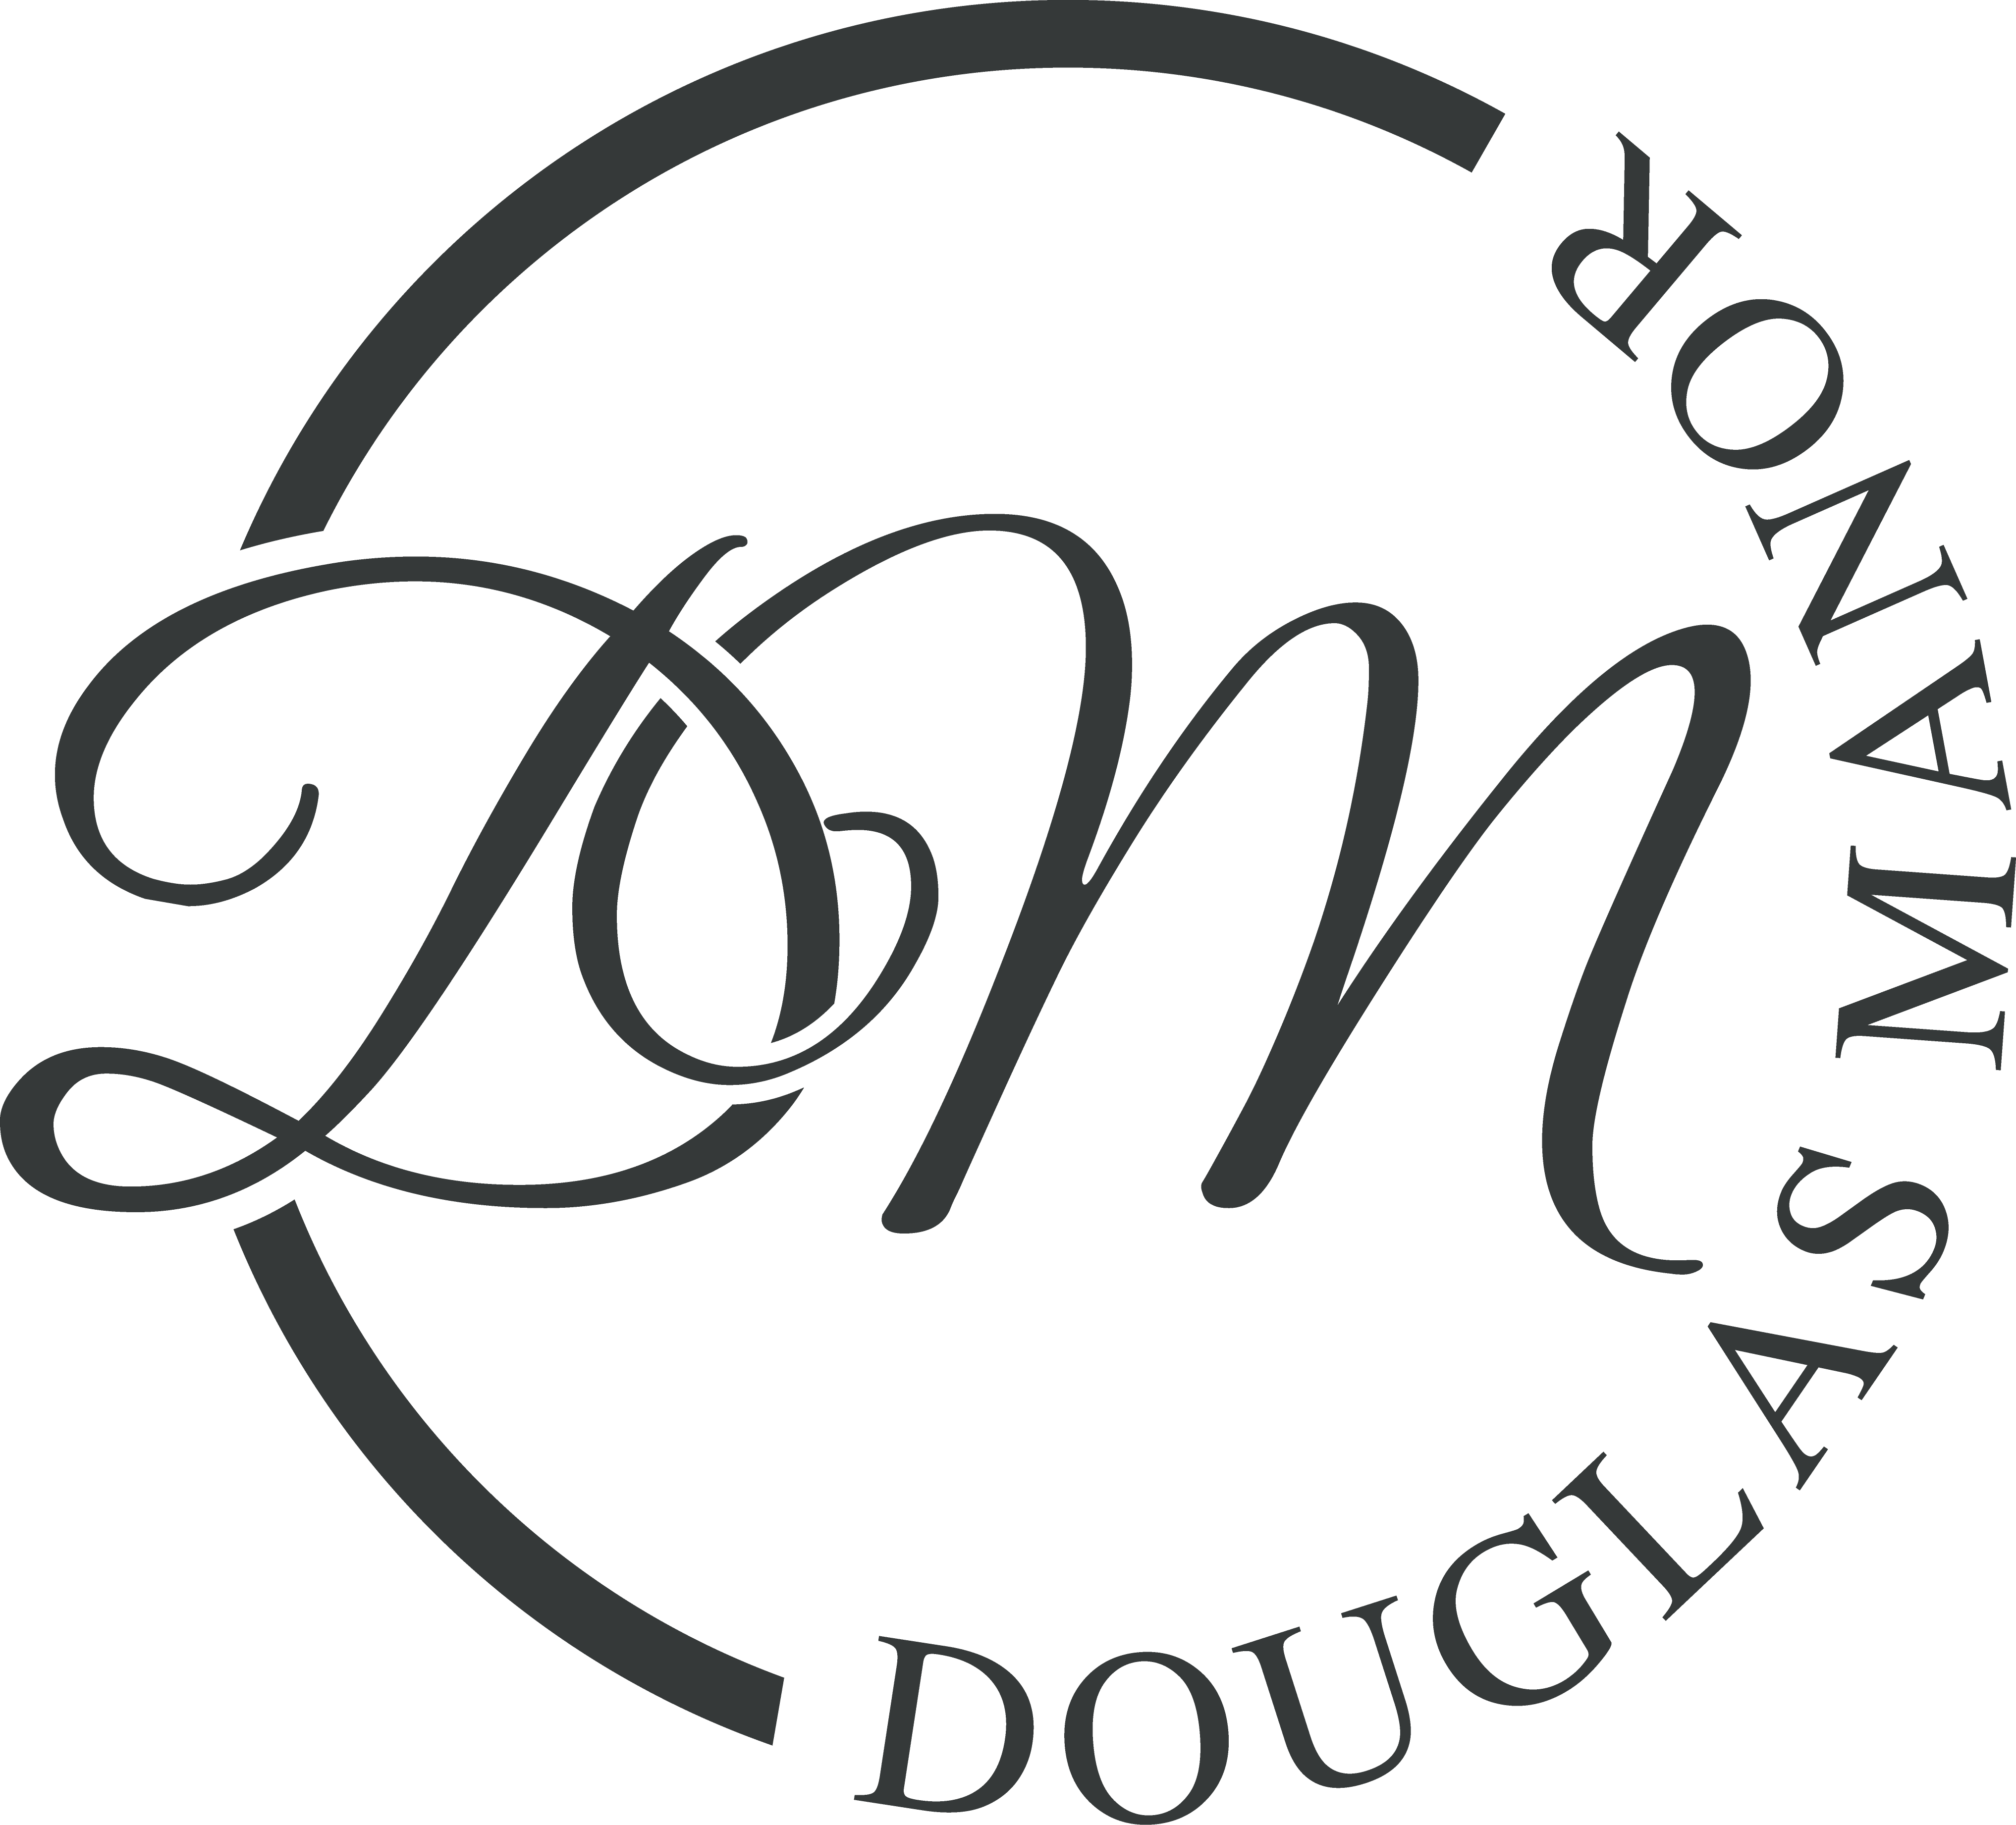 Douglas Manor Launches New Website In Anticipation Of Record-Breaking Summer Wedding Season In Alabama